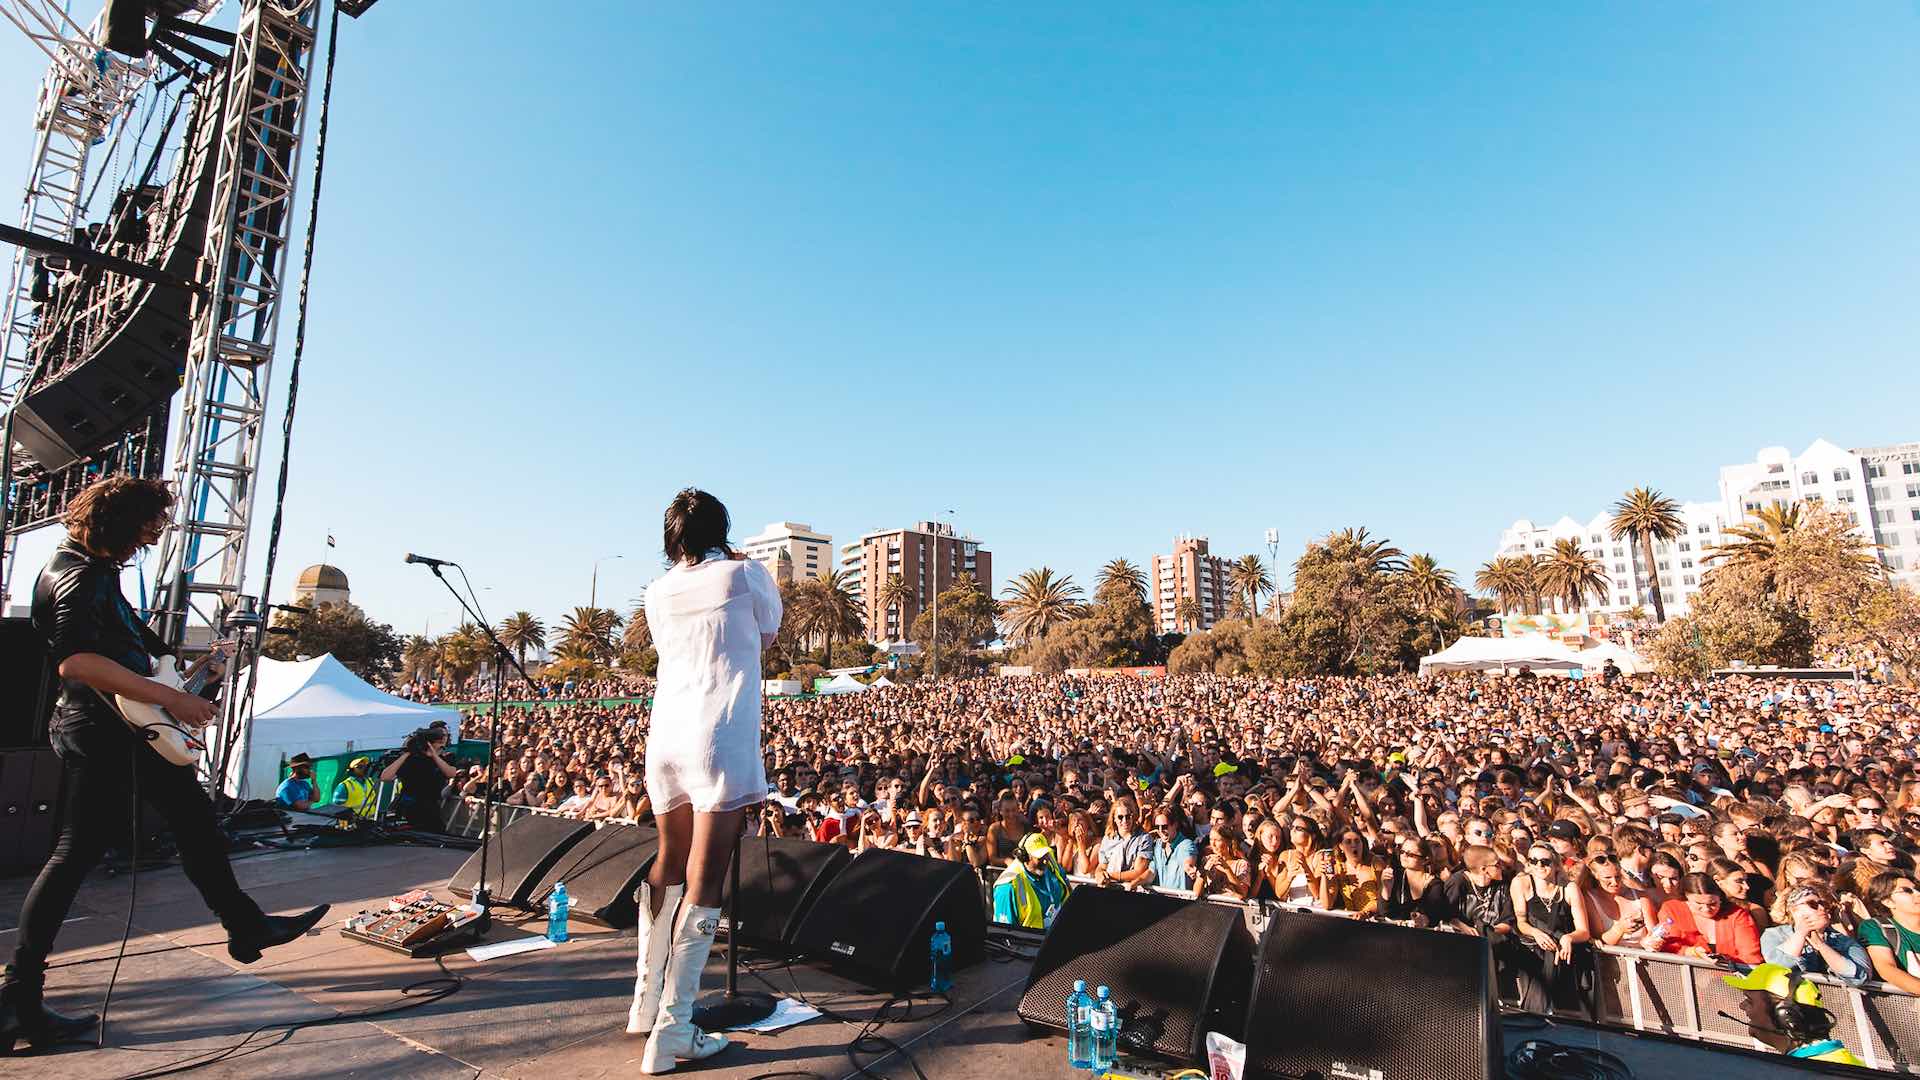 Breaking News: St Kilda Has Been Classified as Victoria's First Ever Live Music Precinct